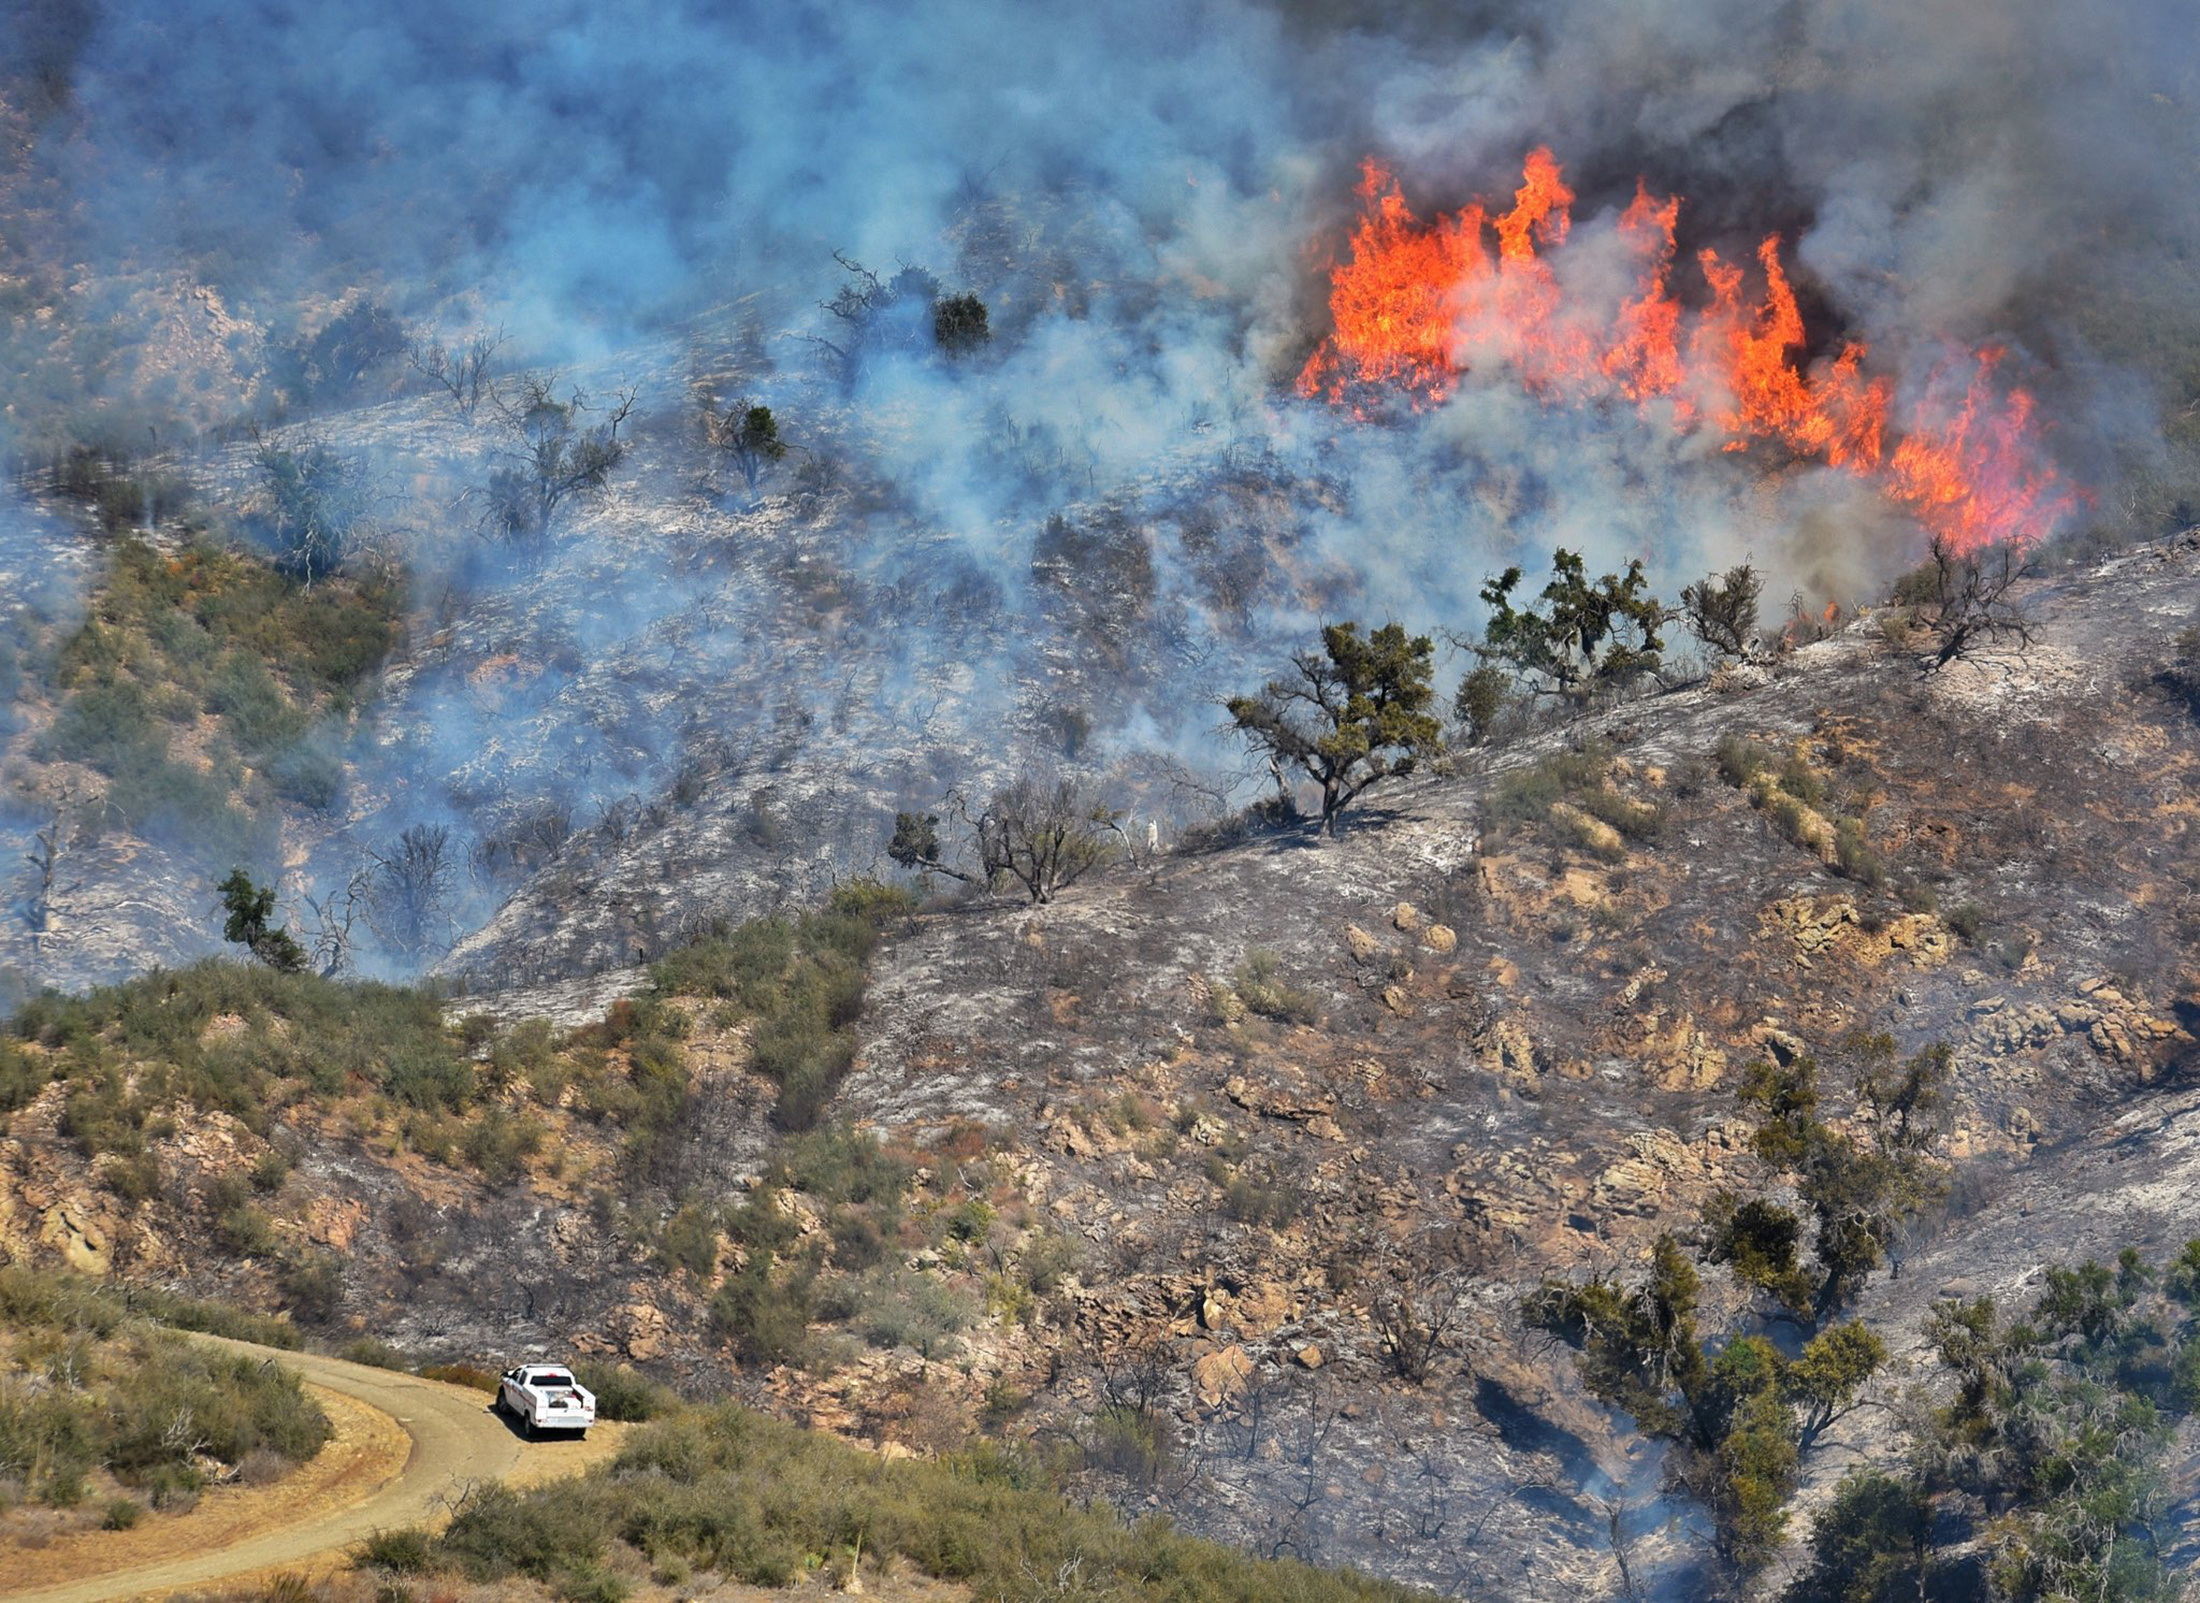 U.S. Forest Service firefighters keep an eye on a small pocket of fire activity in Las Flores Canyon